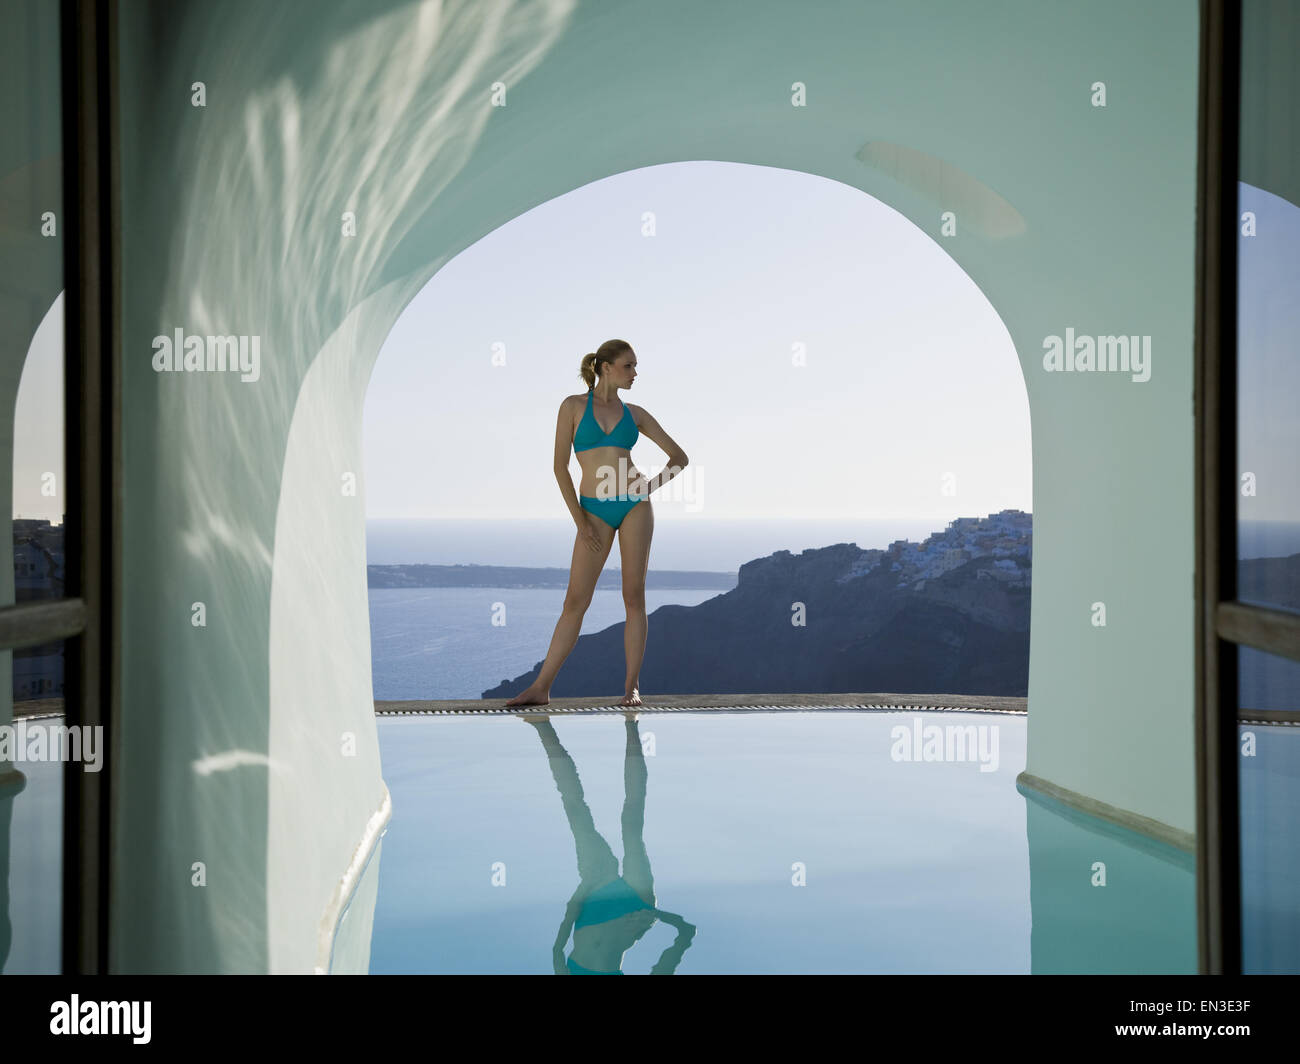 Woman in bikini standing at edge of infinity pool with arch and rock formation Stock Photo